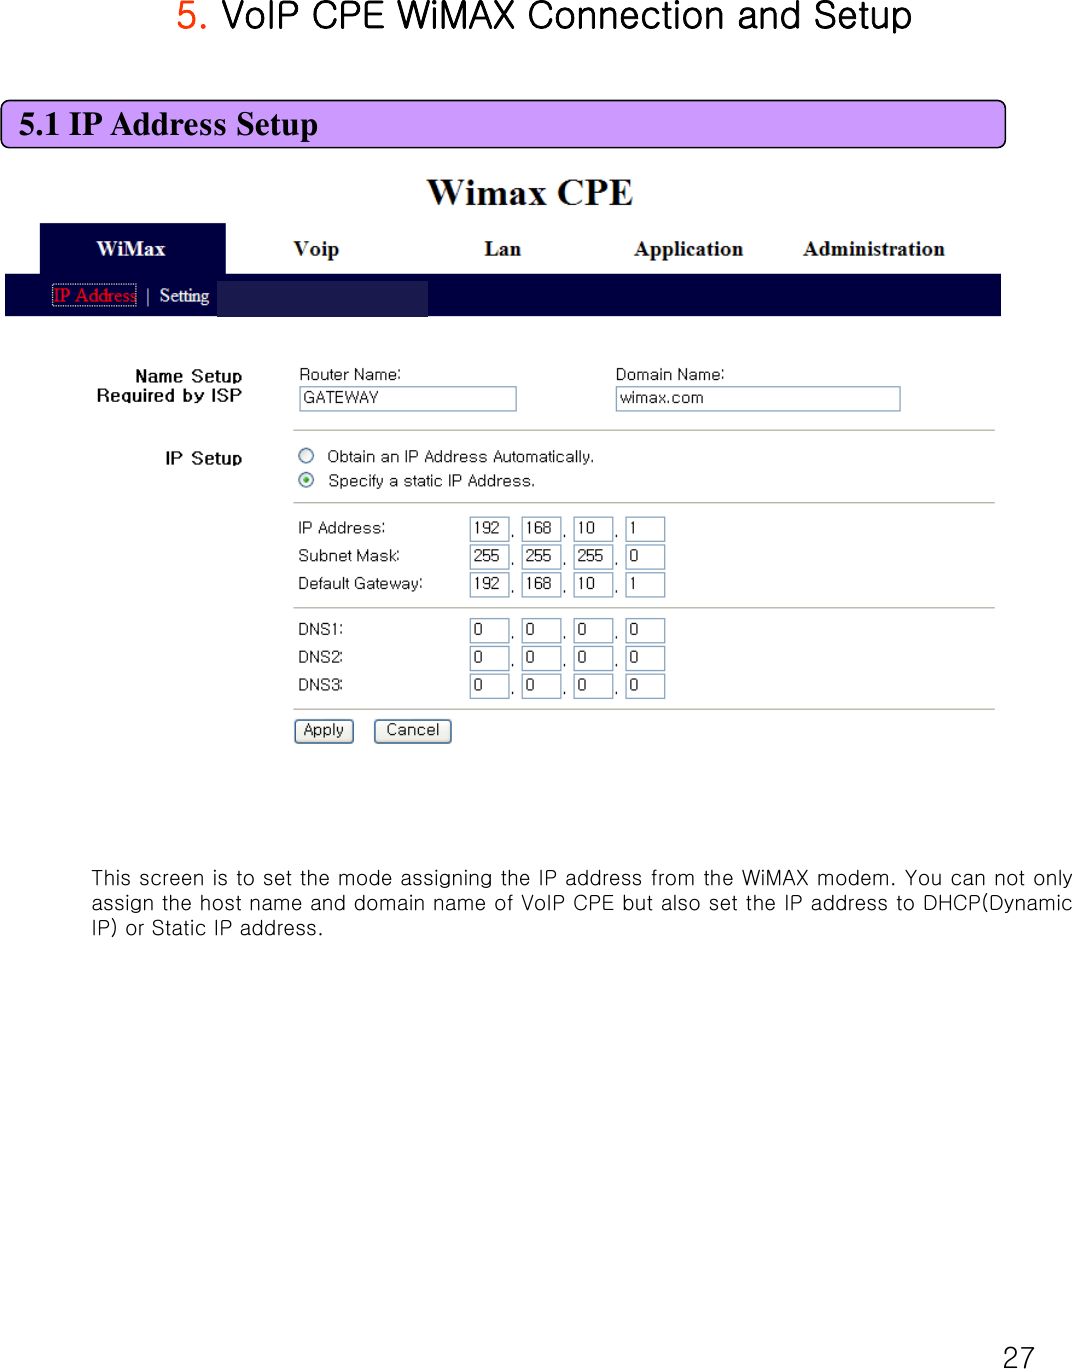 275. VoIP CPE WiMAX Connection and SetupThis screen is to set the mode assigning the IP address from the WiMAX modem. You can not only assign the host name and domain name of VoIP CPE but also set the IP address to DHCP(DynamicIP) or Static IP address.5.1 IP Address Setup 